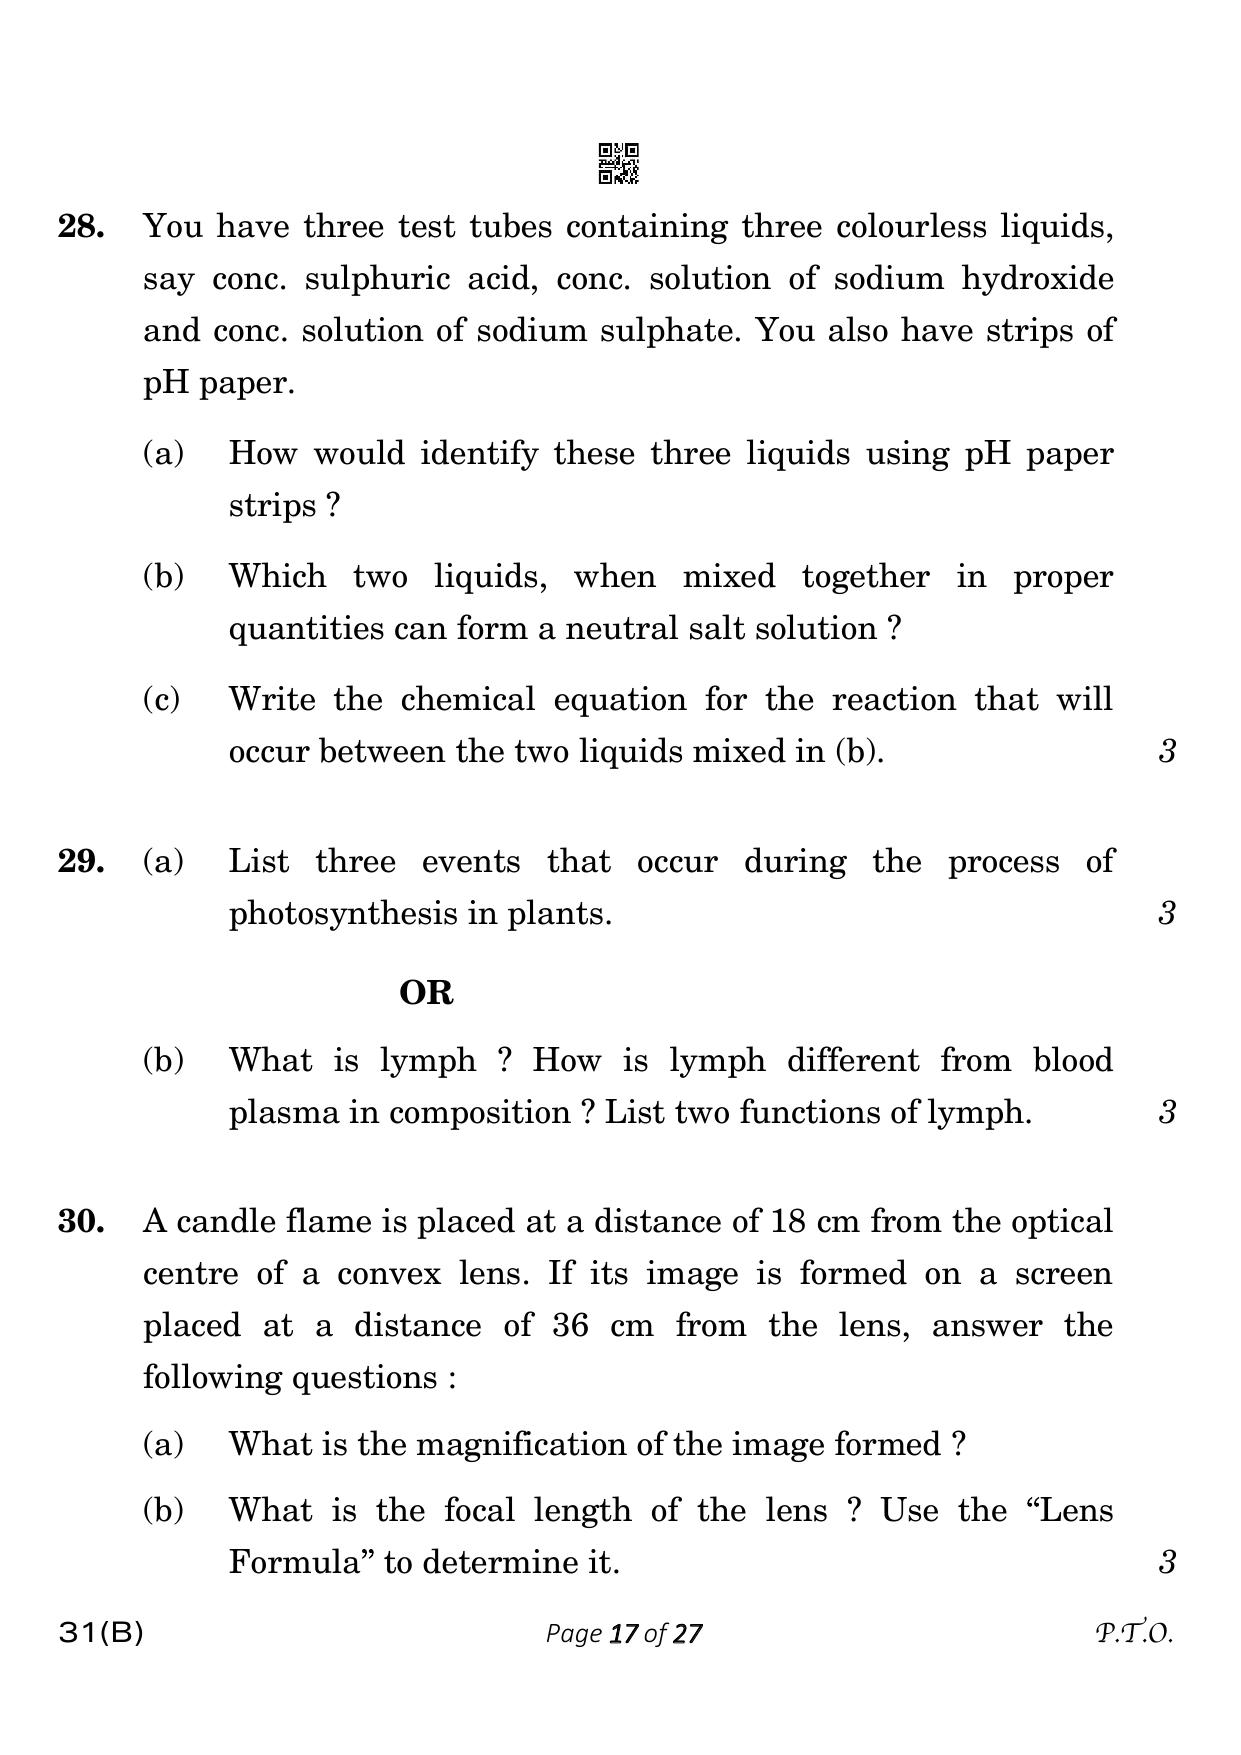 CBSE Class 10 31-B Science 2023 (Compartment) Question Paper - Page 17